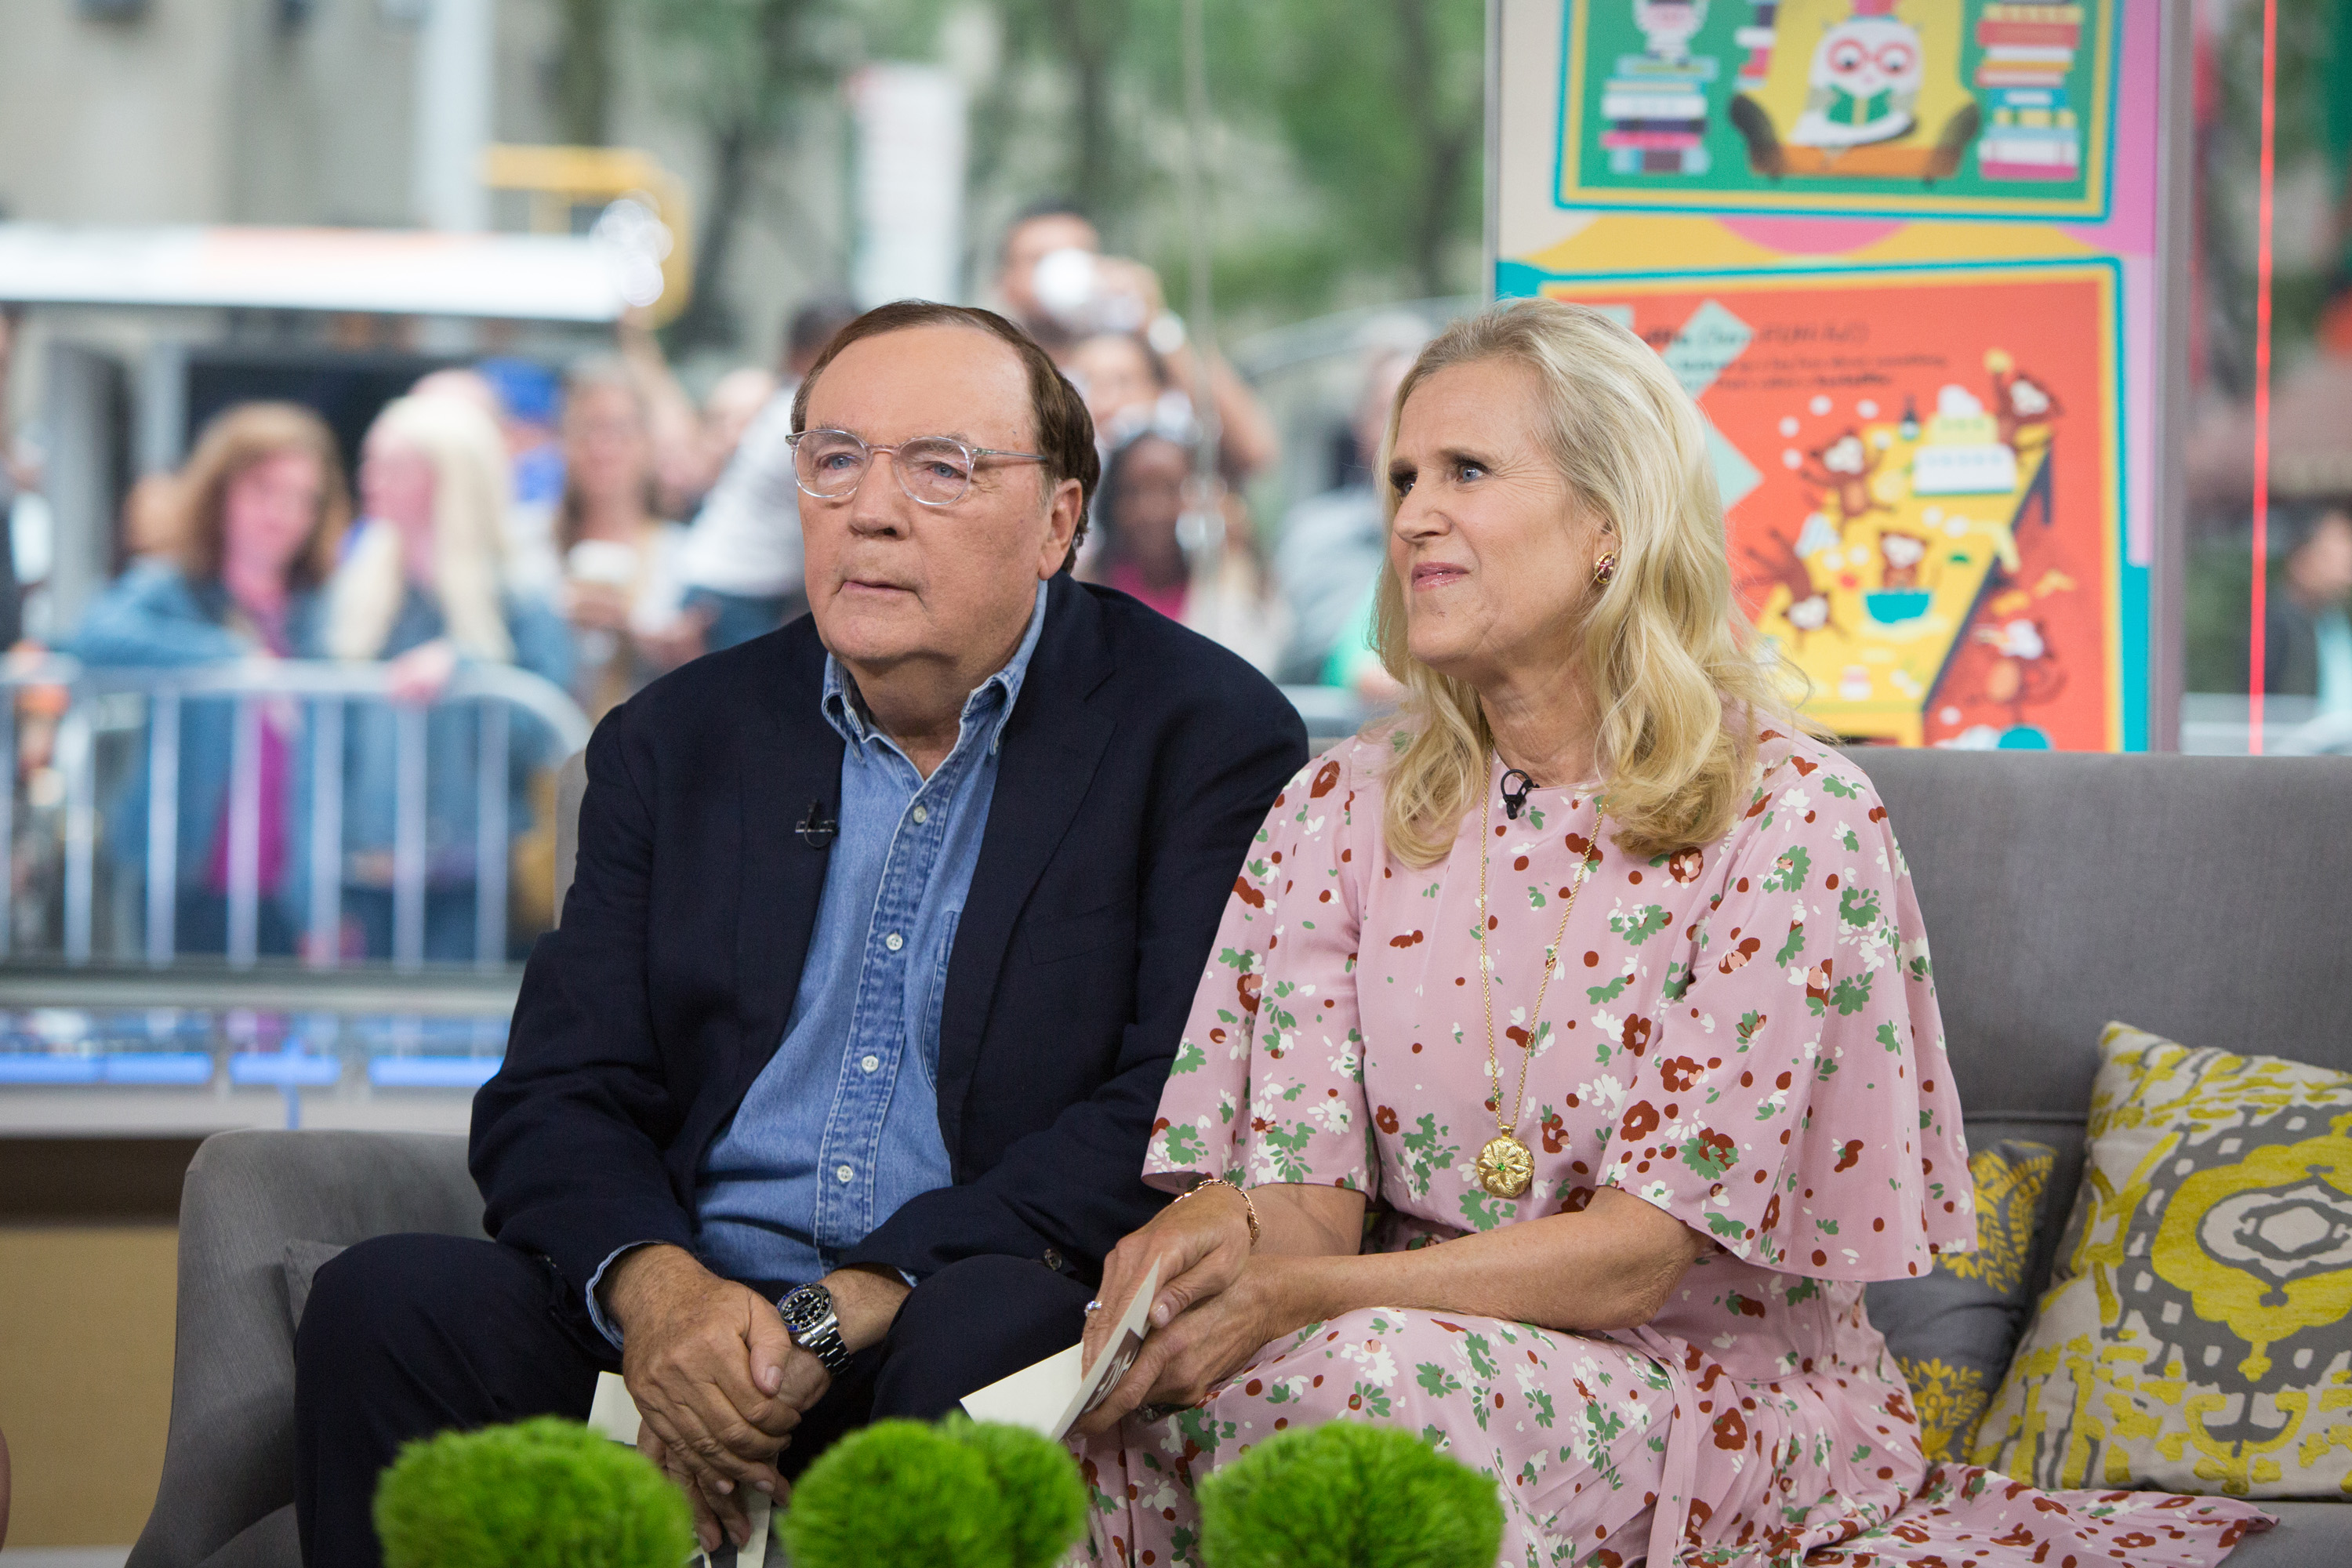 James and Susan Patterson on "Today" on August 29, 2017. | Source: Getty Images